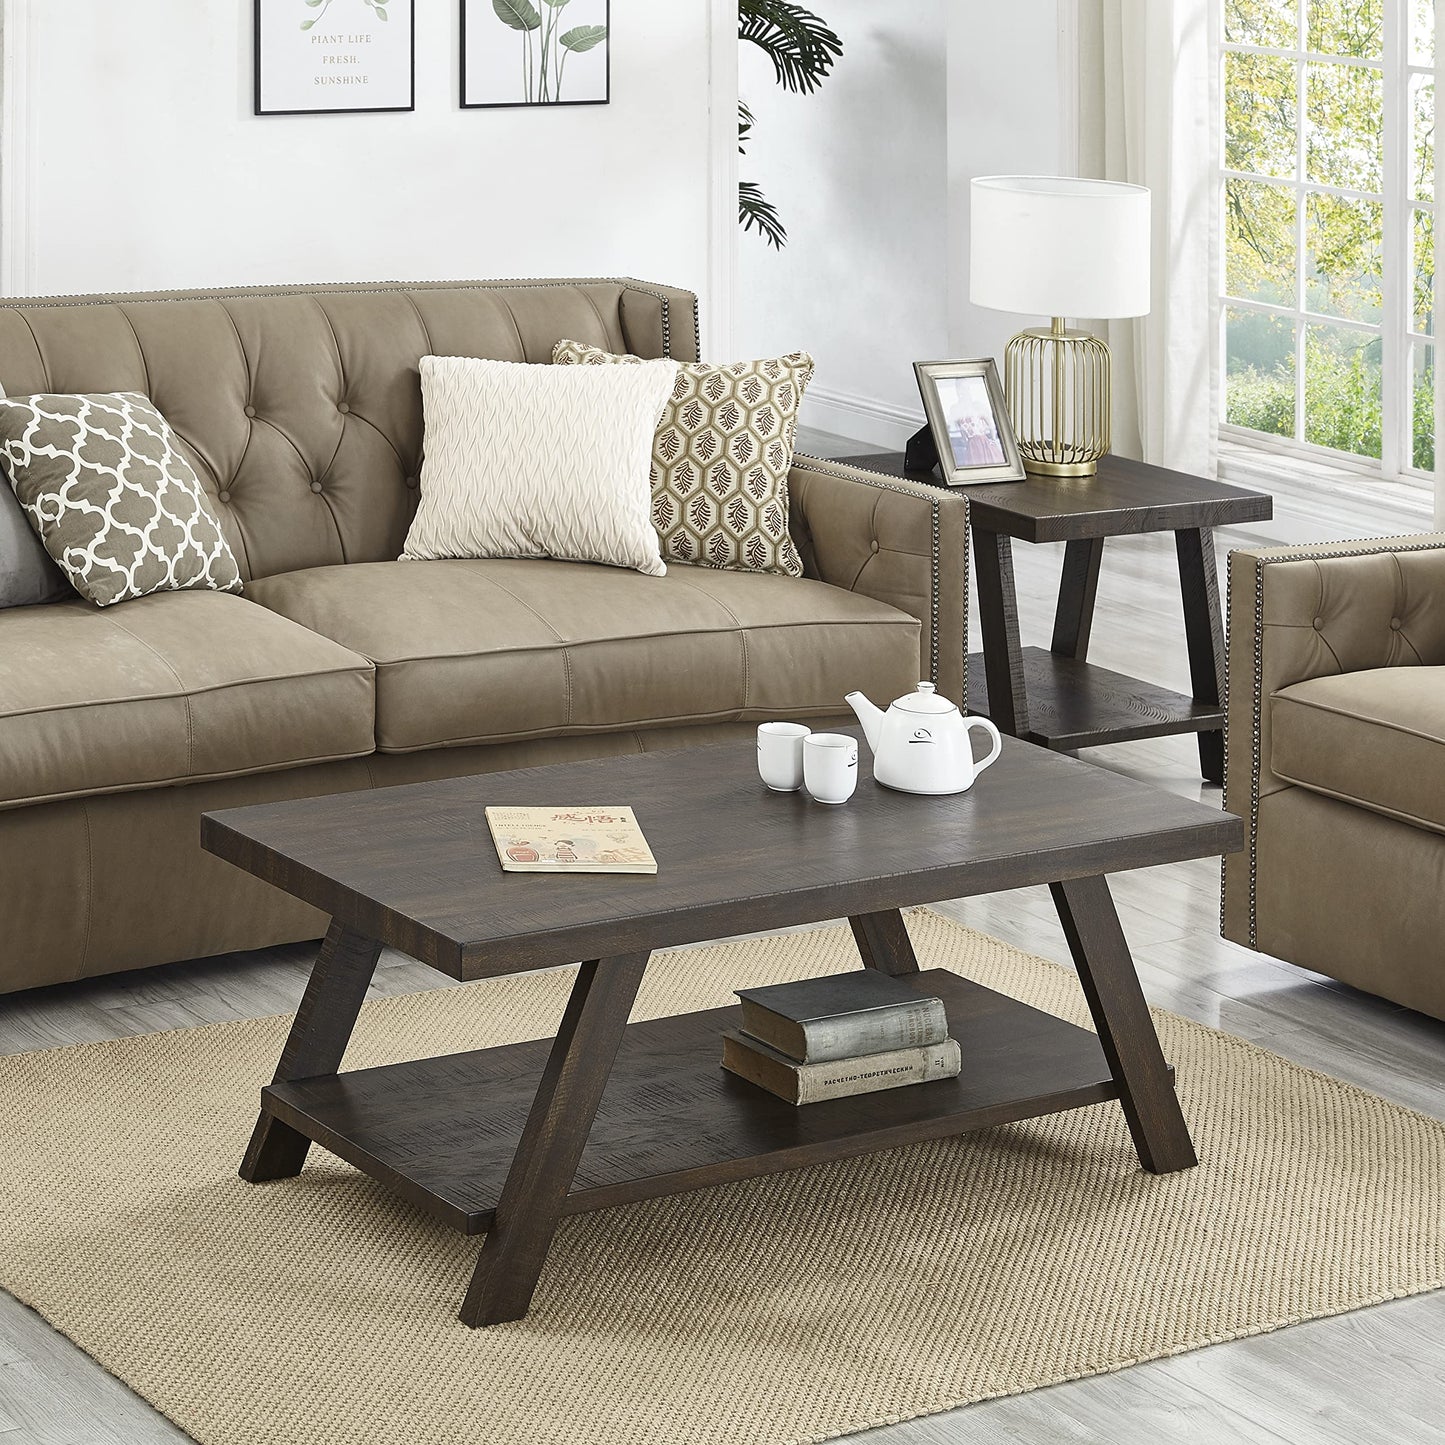 Roundhill Furniture Athens Contemporary 3-Piece Wood Shelf Coffee Table Set, 24D x 48W x 19H in, Espresso